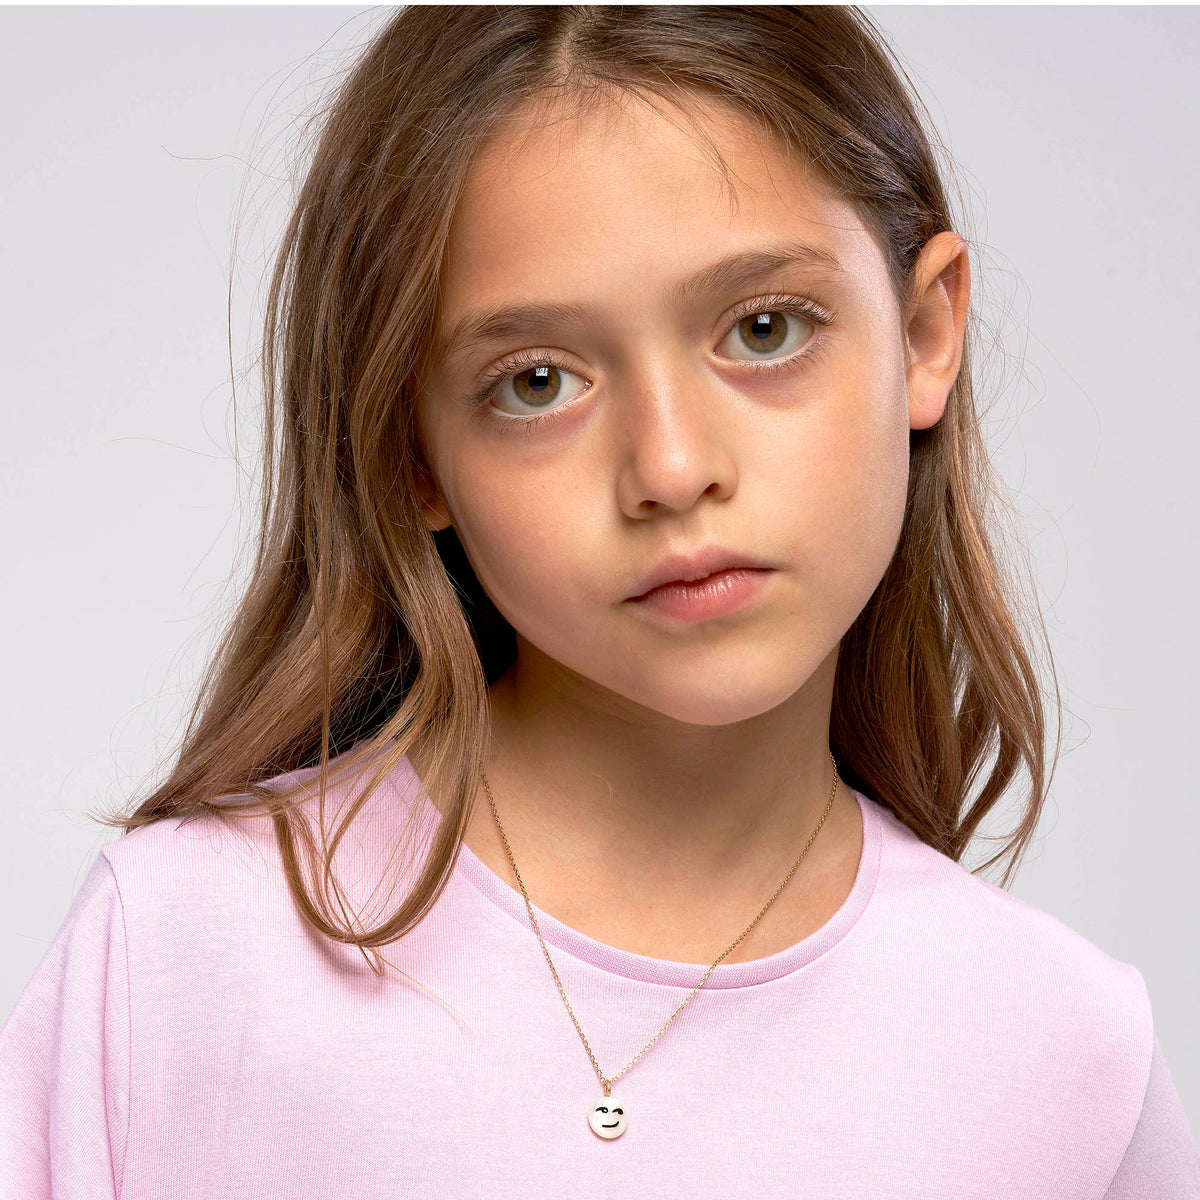 Happy Kids | Smirk Pendant | White Mother of Pearl | 14K Gold Plated 925 Silver